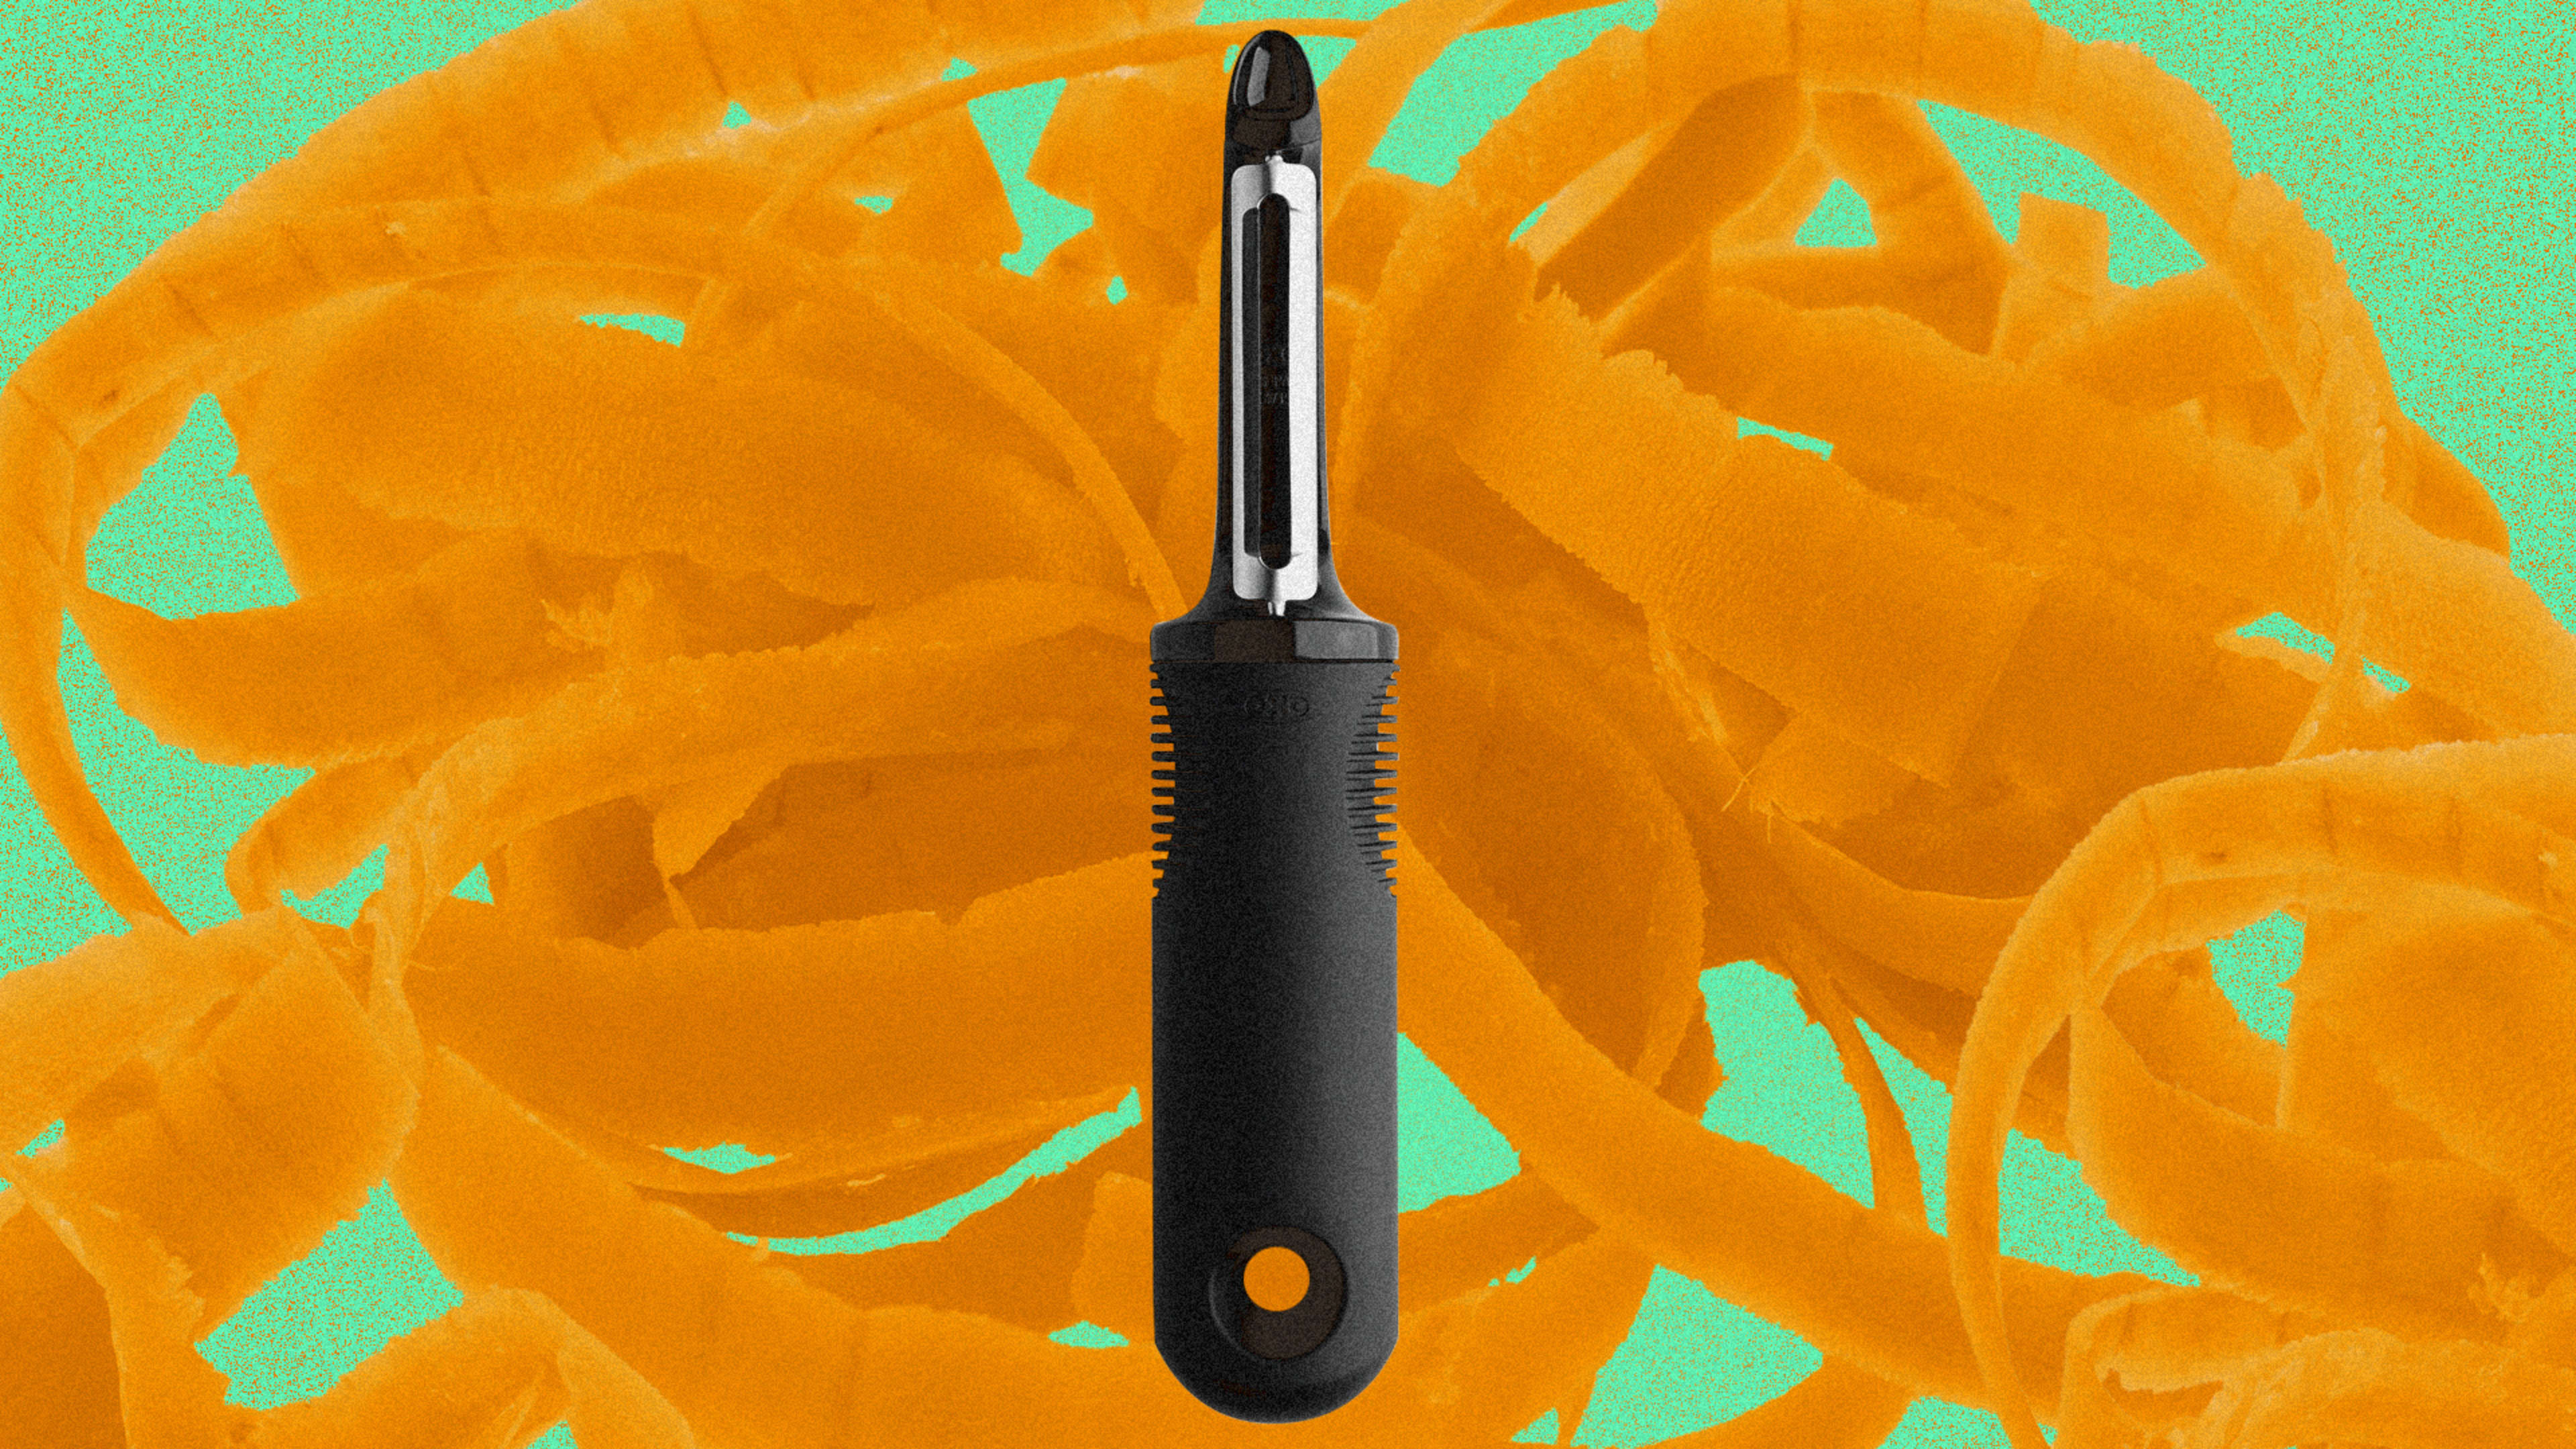 The untold story of the vegetable peeler that changed the world